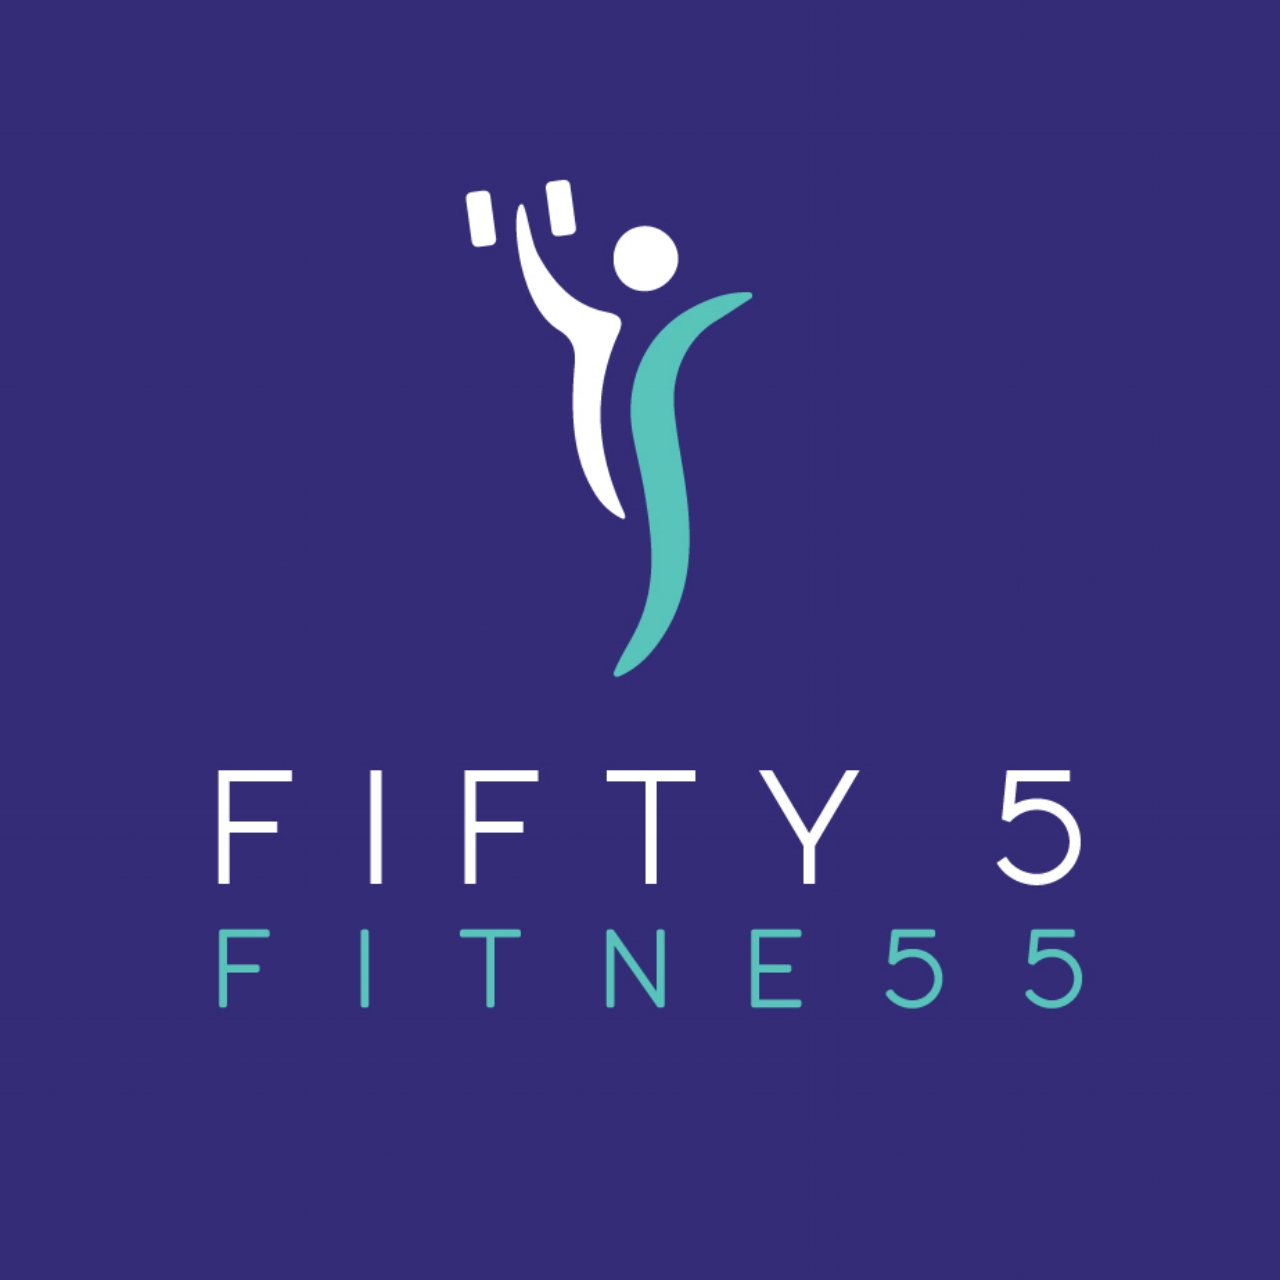 Fifty 5 Fitness